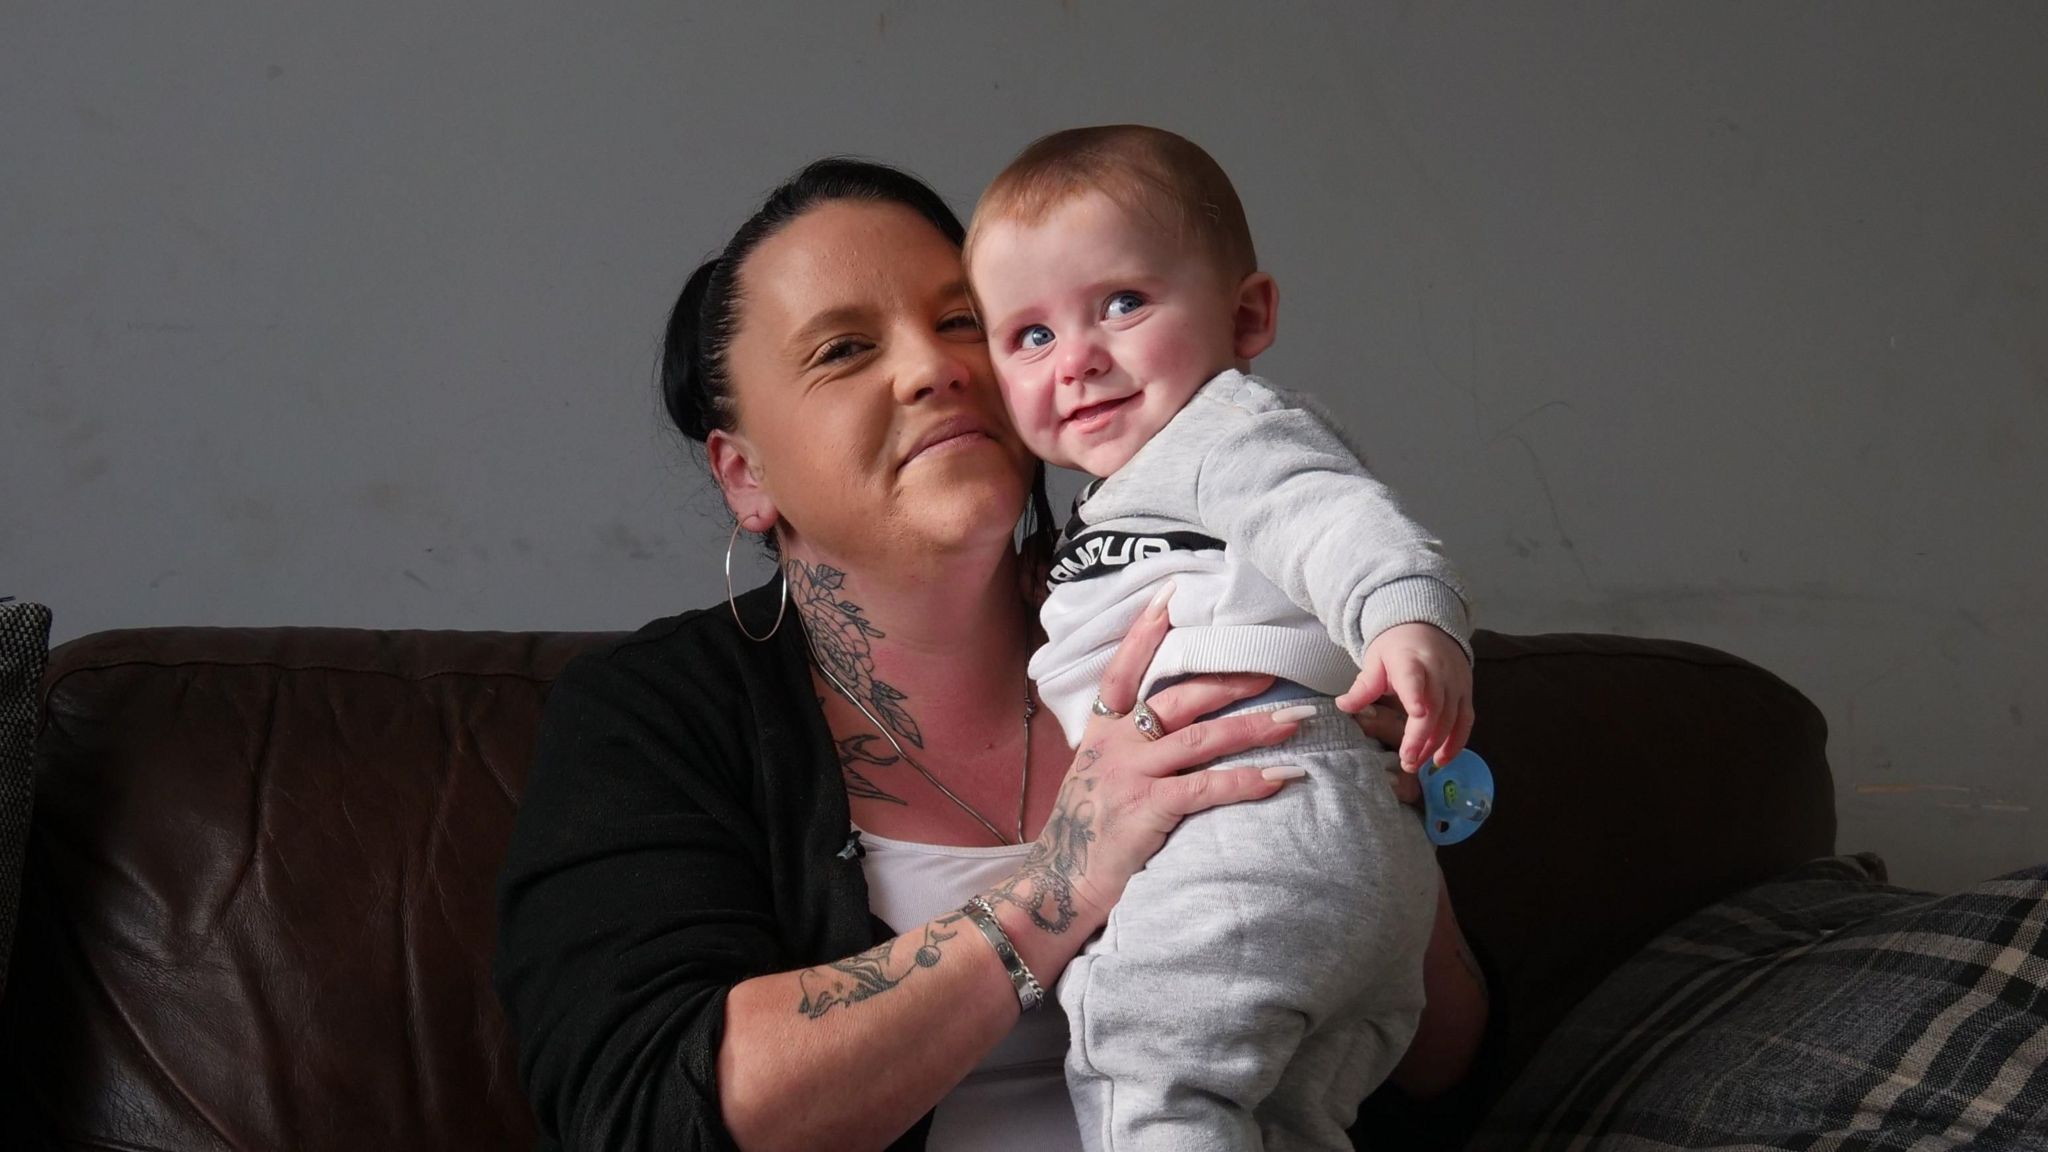 Kayleigh, a woman with dark hair and hoop earrings, sits on a sofa holding her baby. Kayleigh is looking into the camera and they are both smiling.